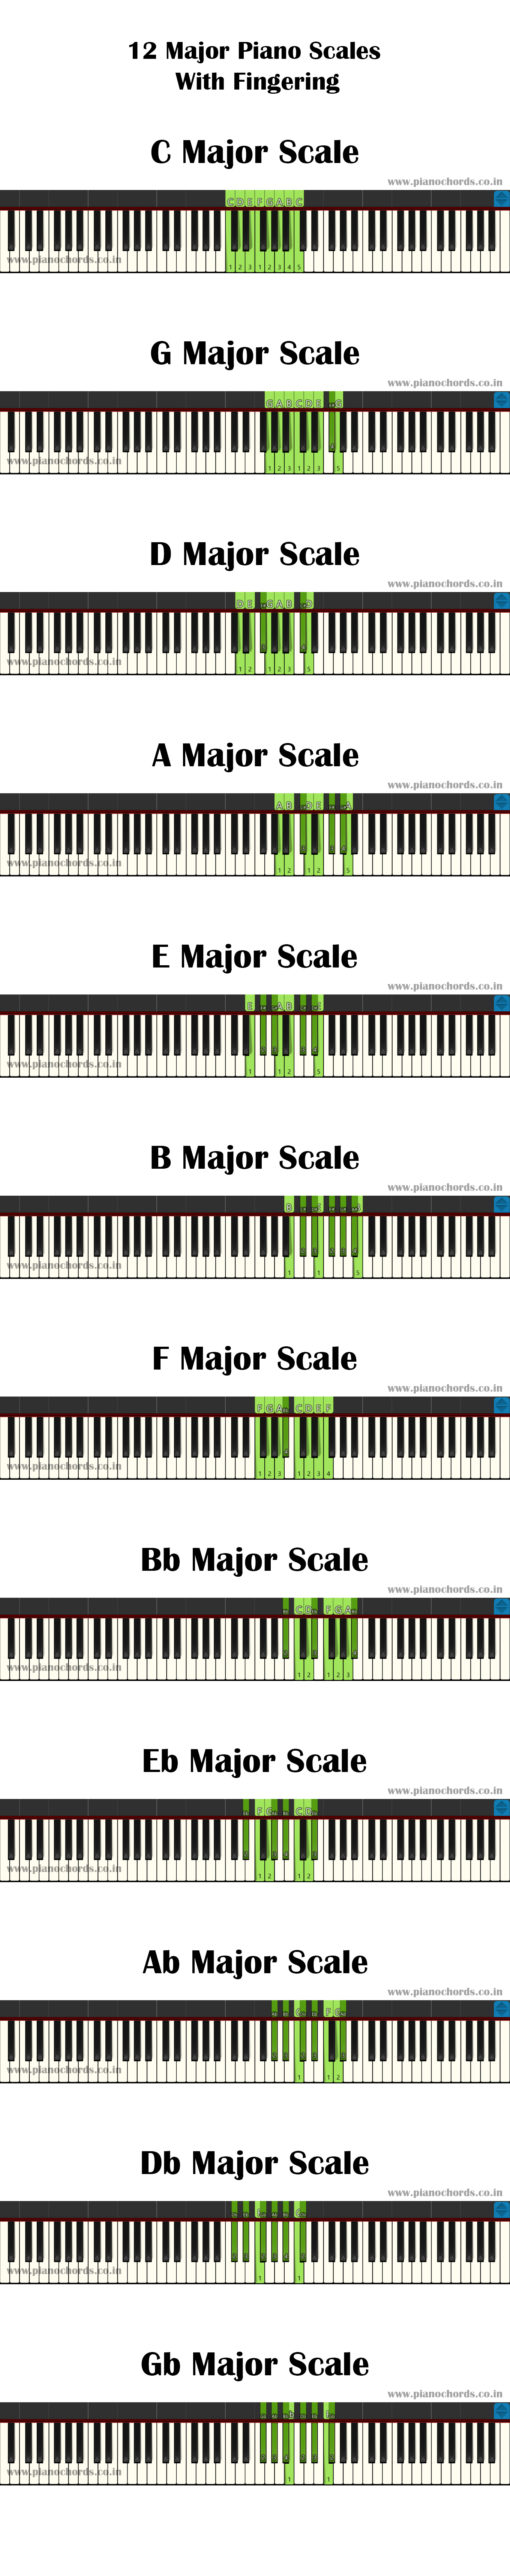 Printable Piano scales PDF With Fingering